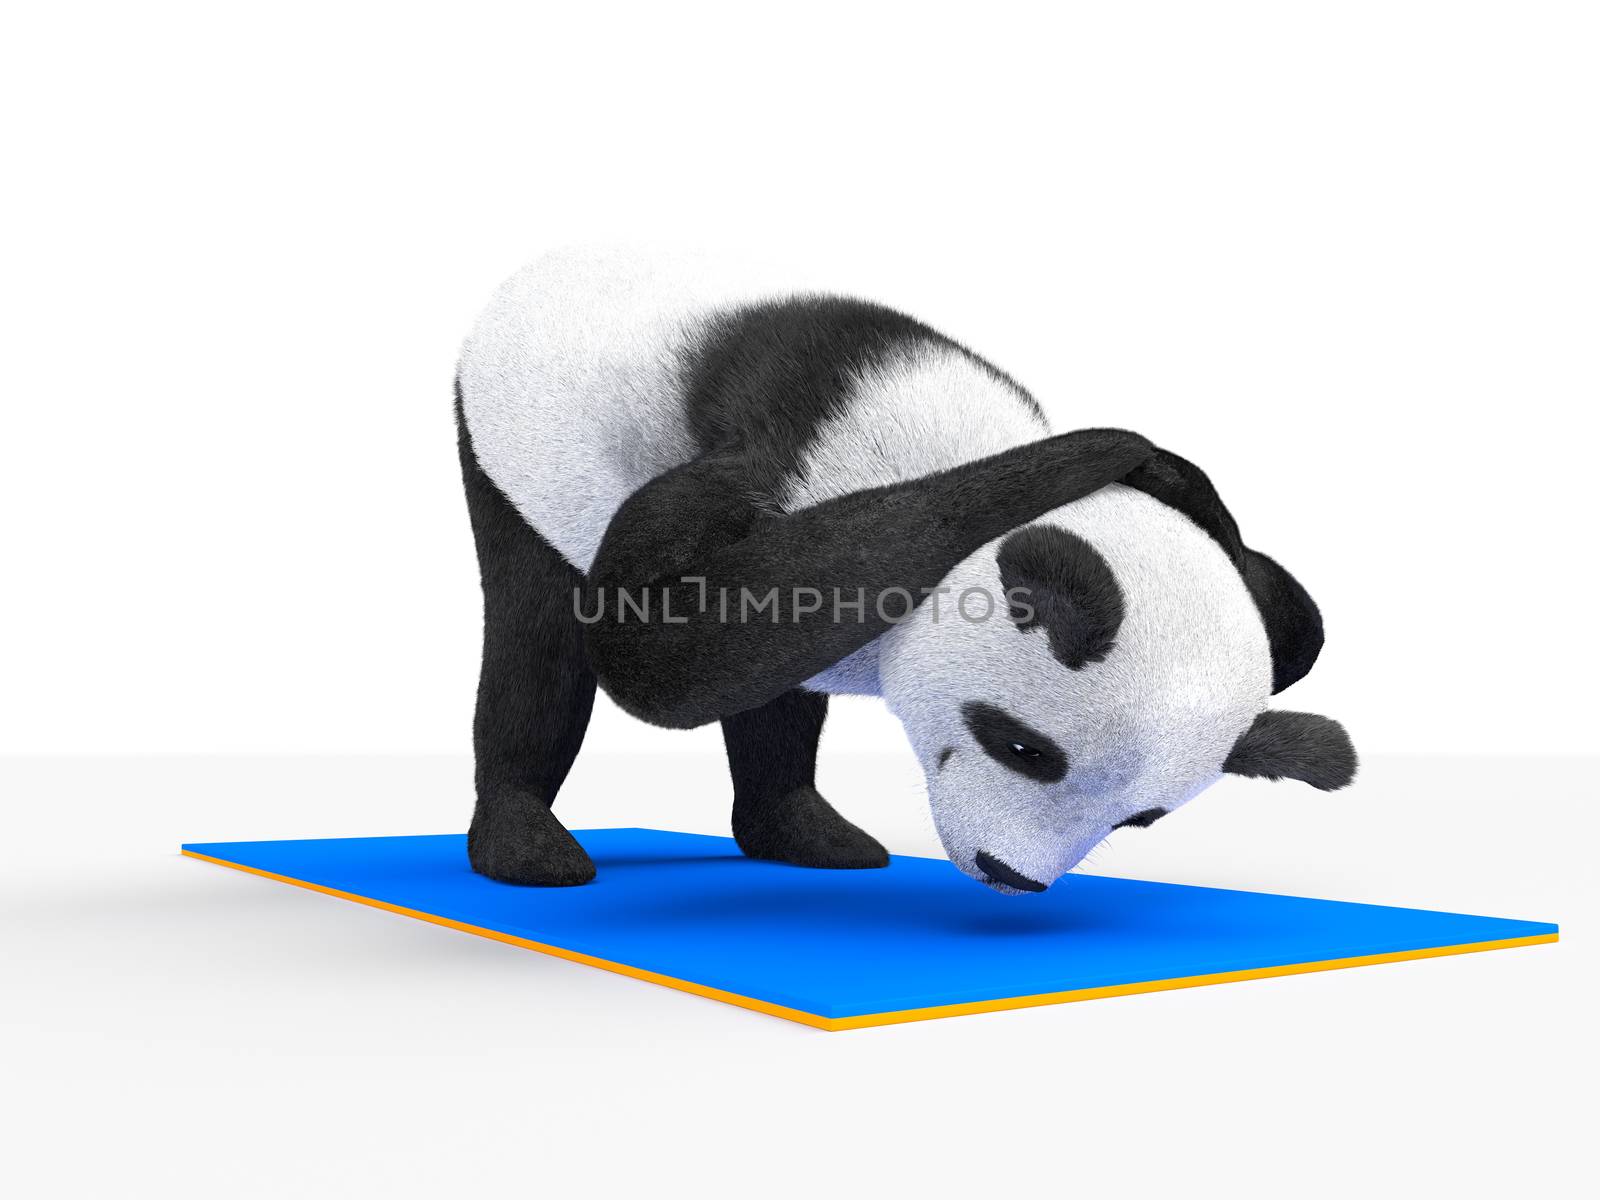 Panda leans forward and pulled his head to floor. Stretching the muscles of the back on a rug